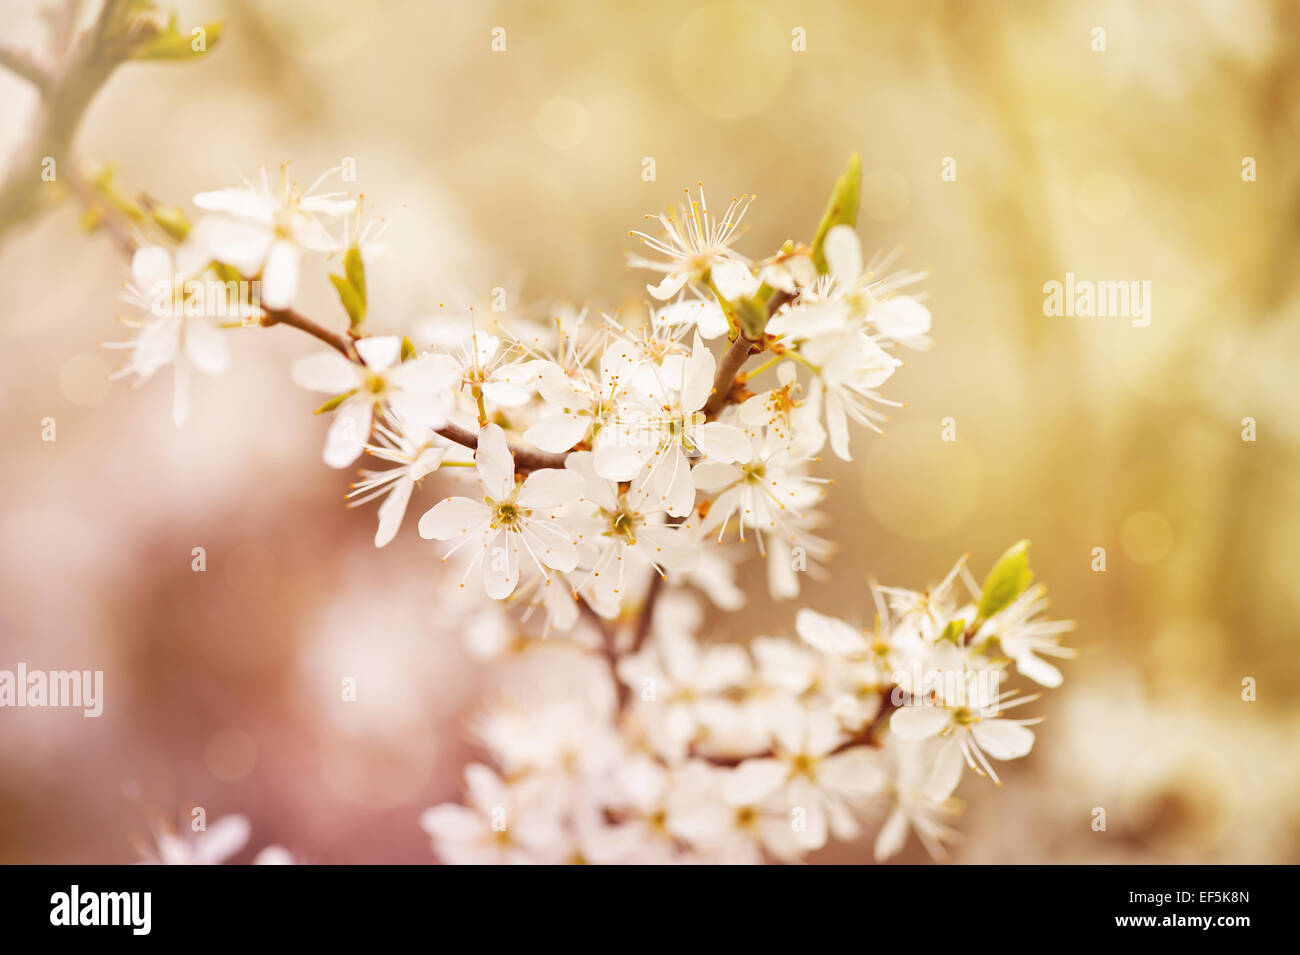 Blooming Cerasus cherry tree white blossoms Stock Photo